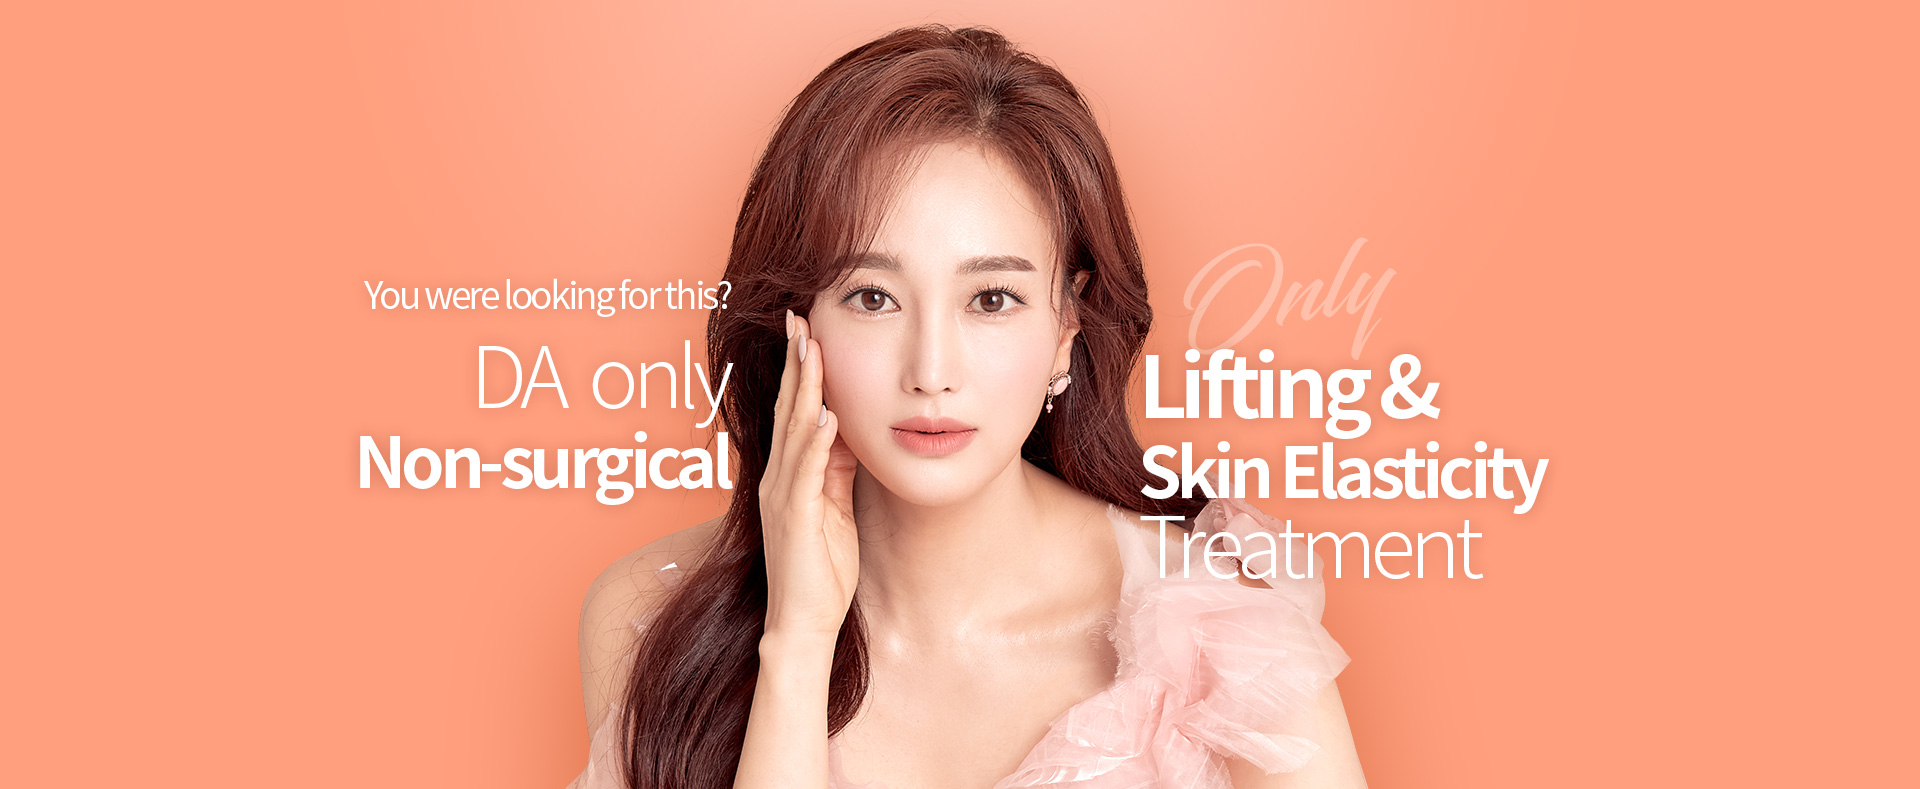 DA only Non-surgical, Lifting&Skin Elasticity Treatment